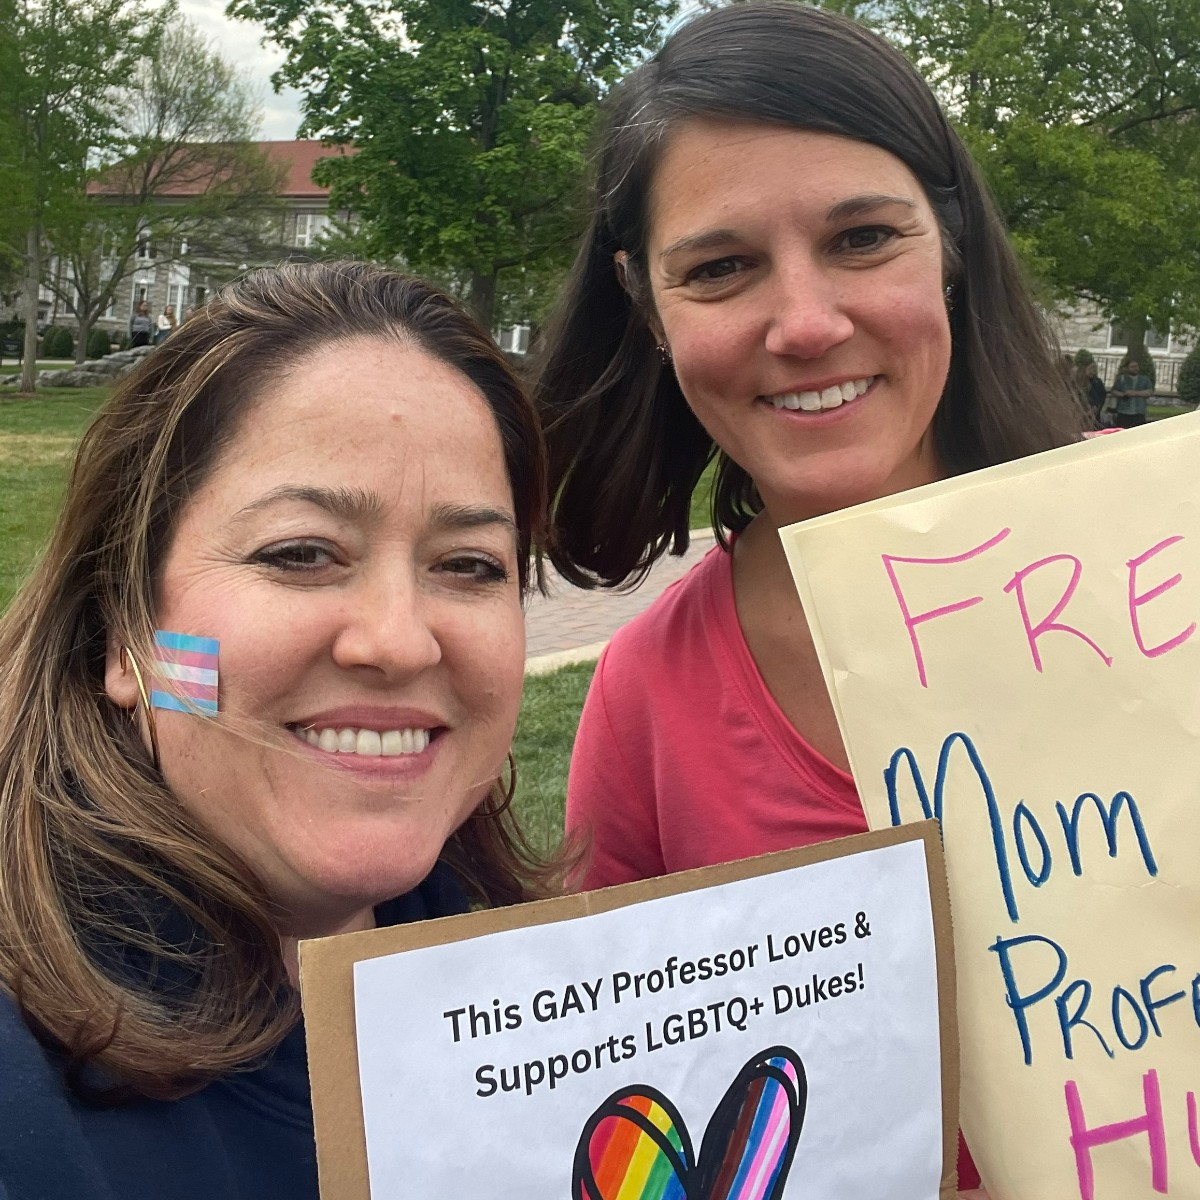 Thank you COE family for offering free hugs in support of LGBTQ+ Dukes yesterday on the Quad. If you missed your free hug, stop by the building and ask!💜💛
#LGBTQStudents #PrideInEducation #SafeSchools #TransRightsAreHumanRights #LoveIsLove #QueerYouth #InclusiveEducation